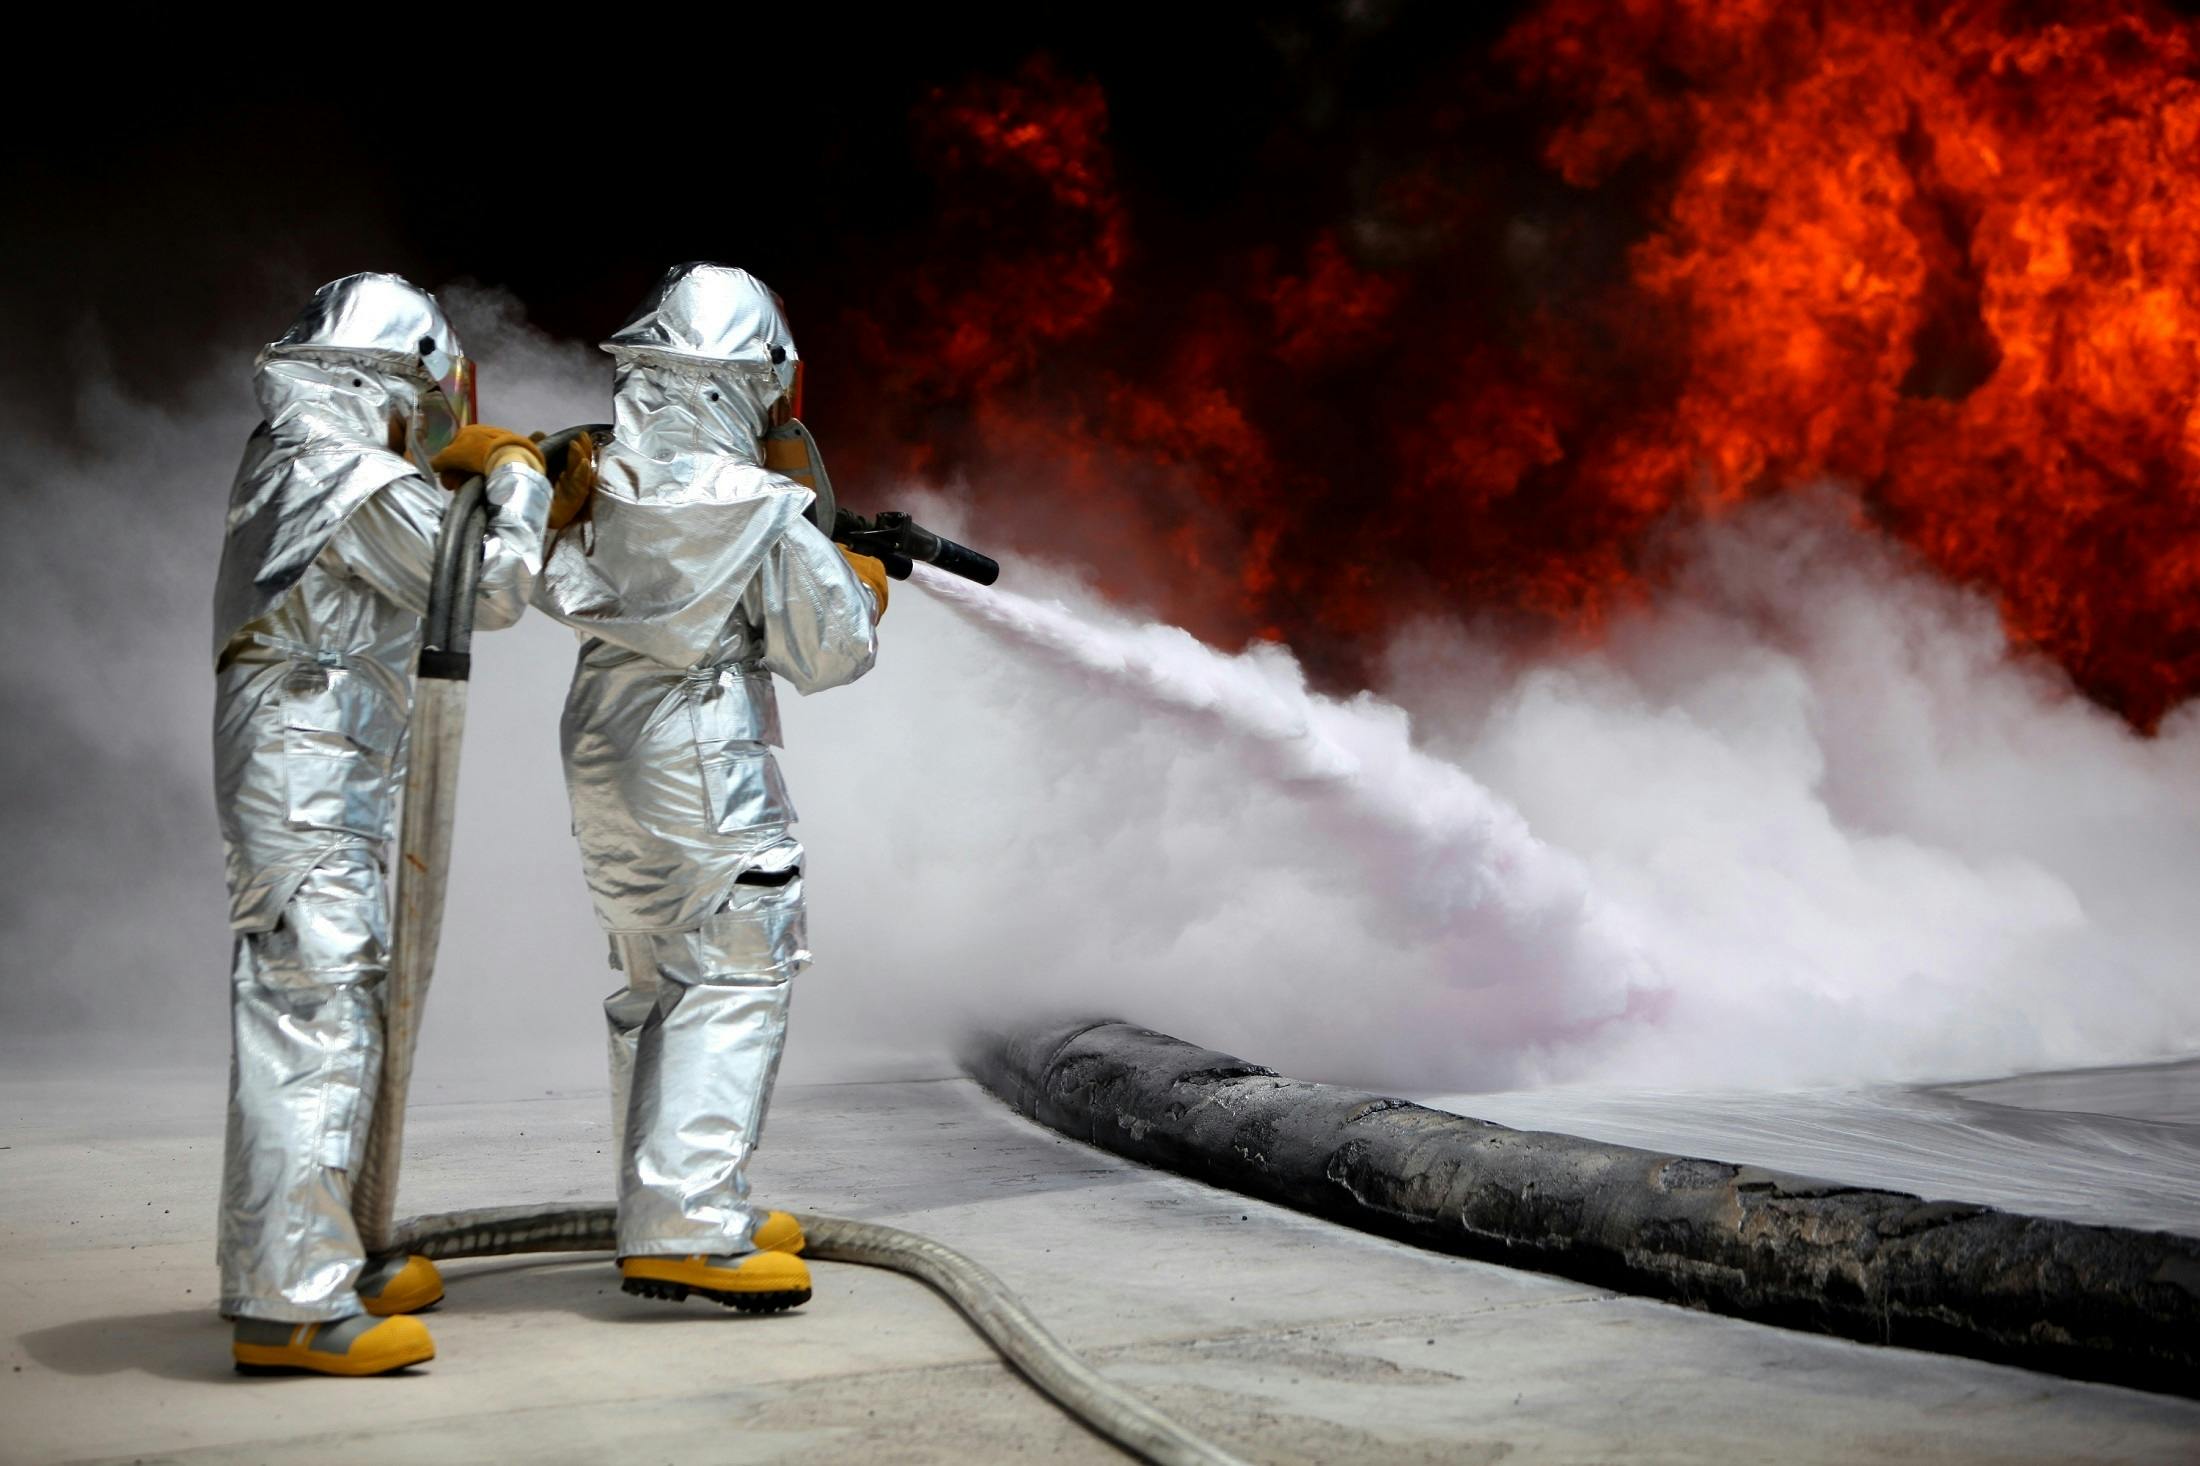 two firefighters trying to exting a fire with a hose, a photo, shutterstock, graffiti, wear spacesuits, oily substances, ap, silver